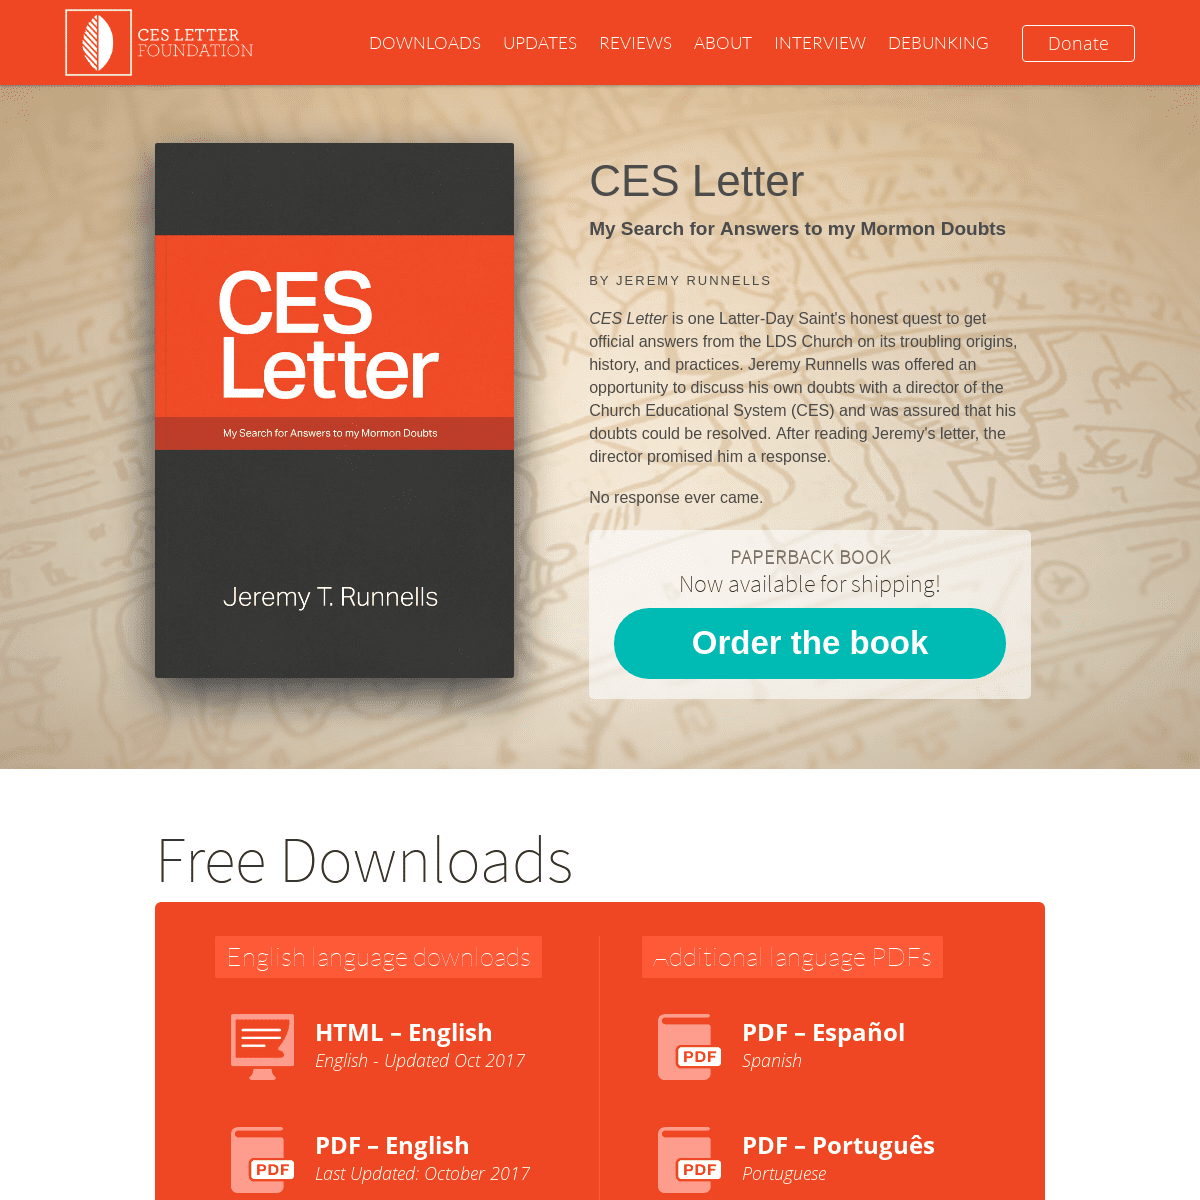 CES Letter - My Search for Answers to my Mormon Doubts